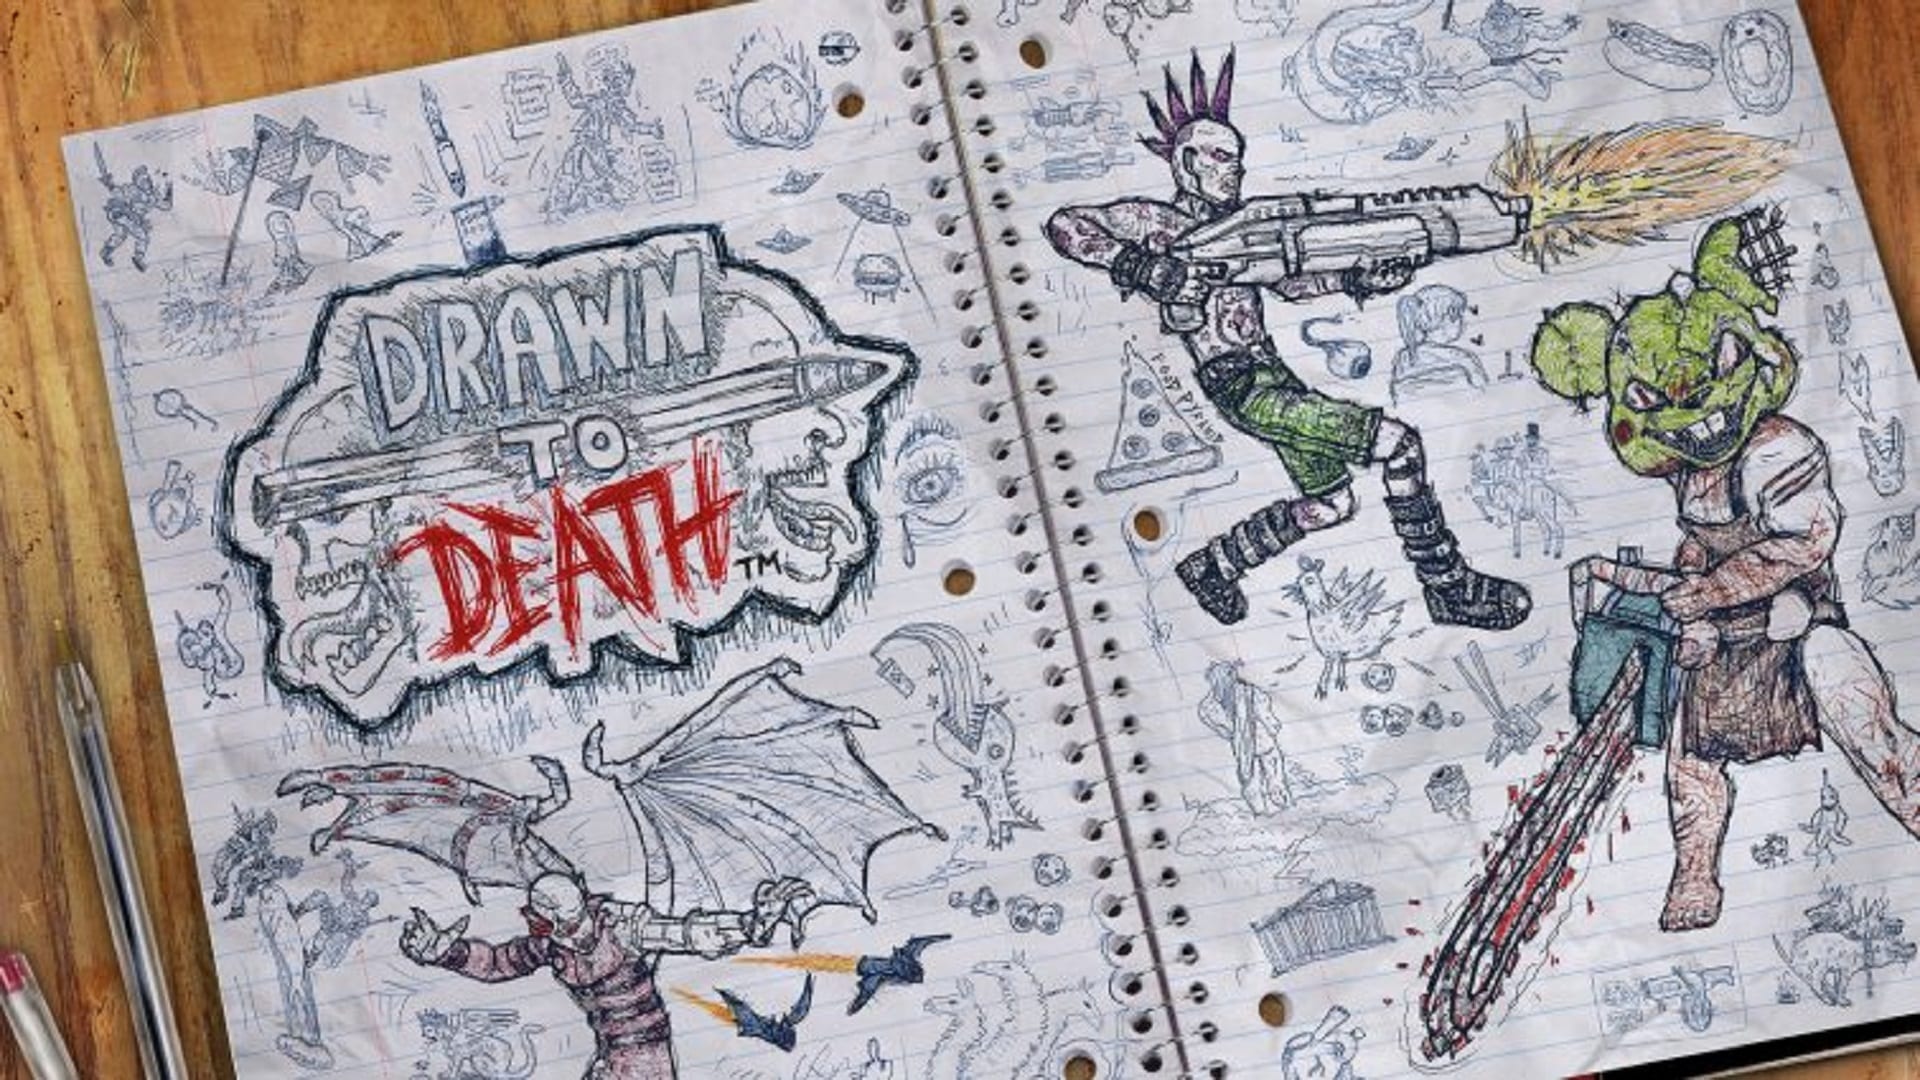 Online Shooter Drawn To Death Will Be Free For PS Plus Members In April